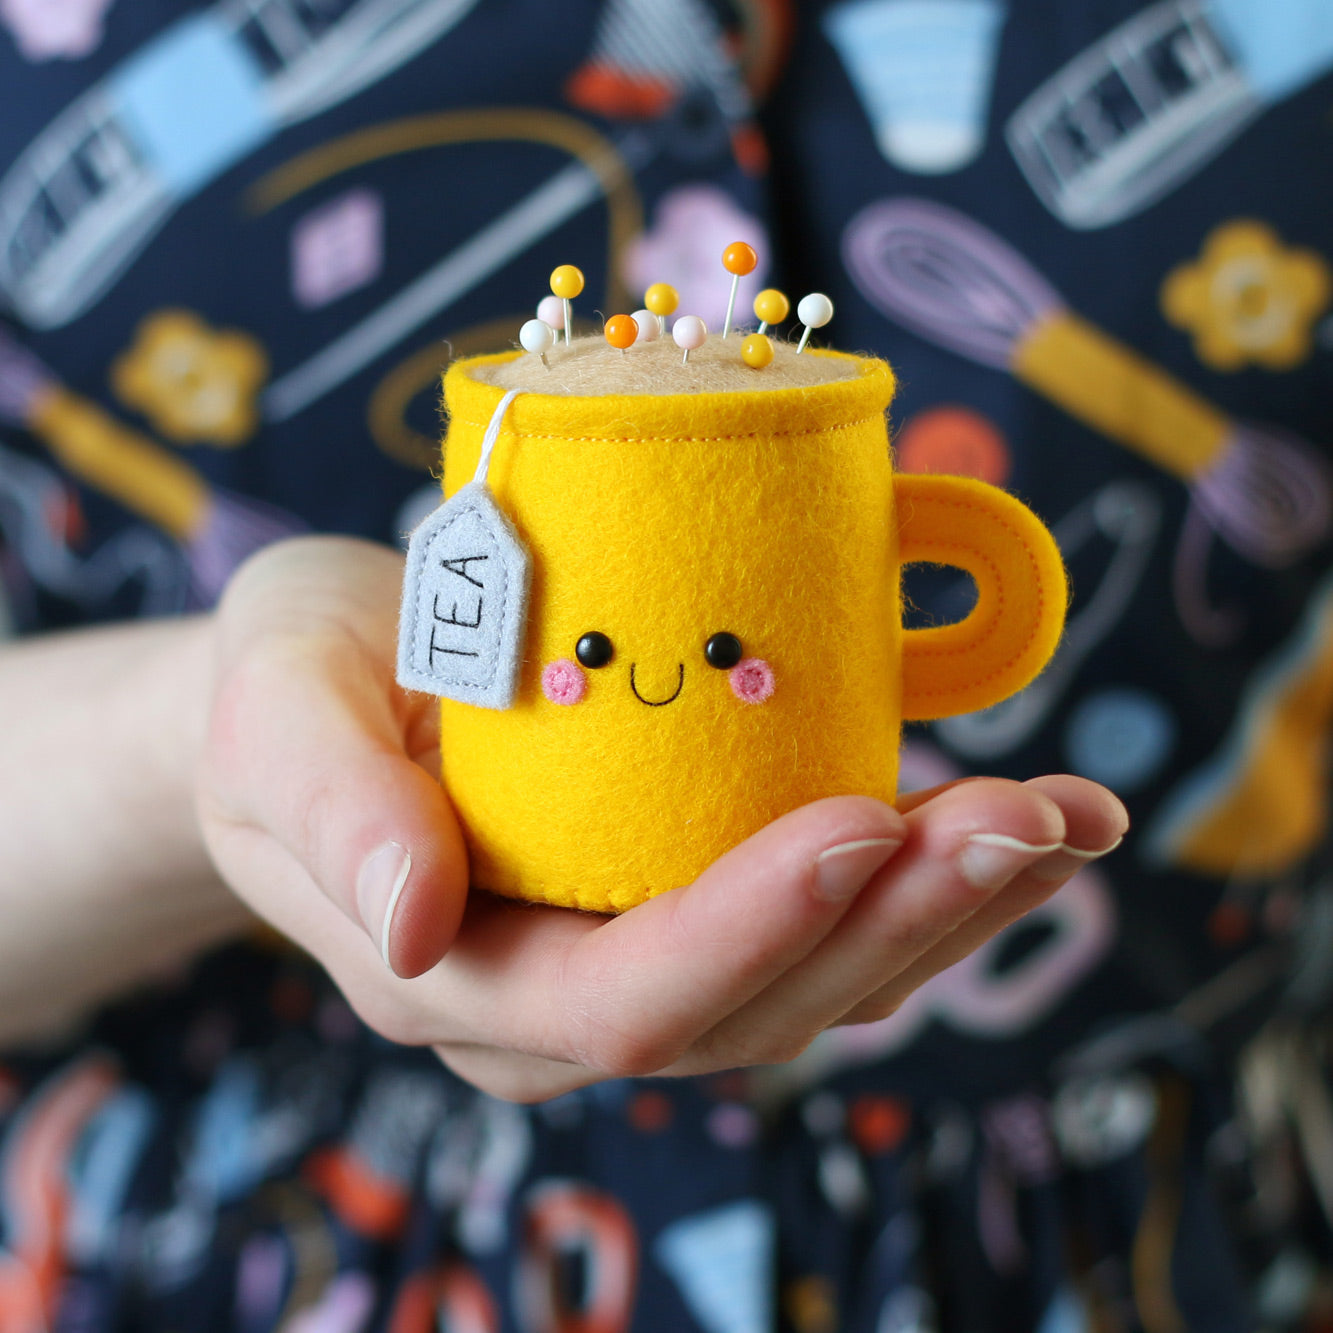 Person holding a bright yellow teacup pincushion